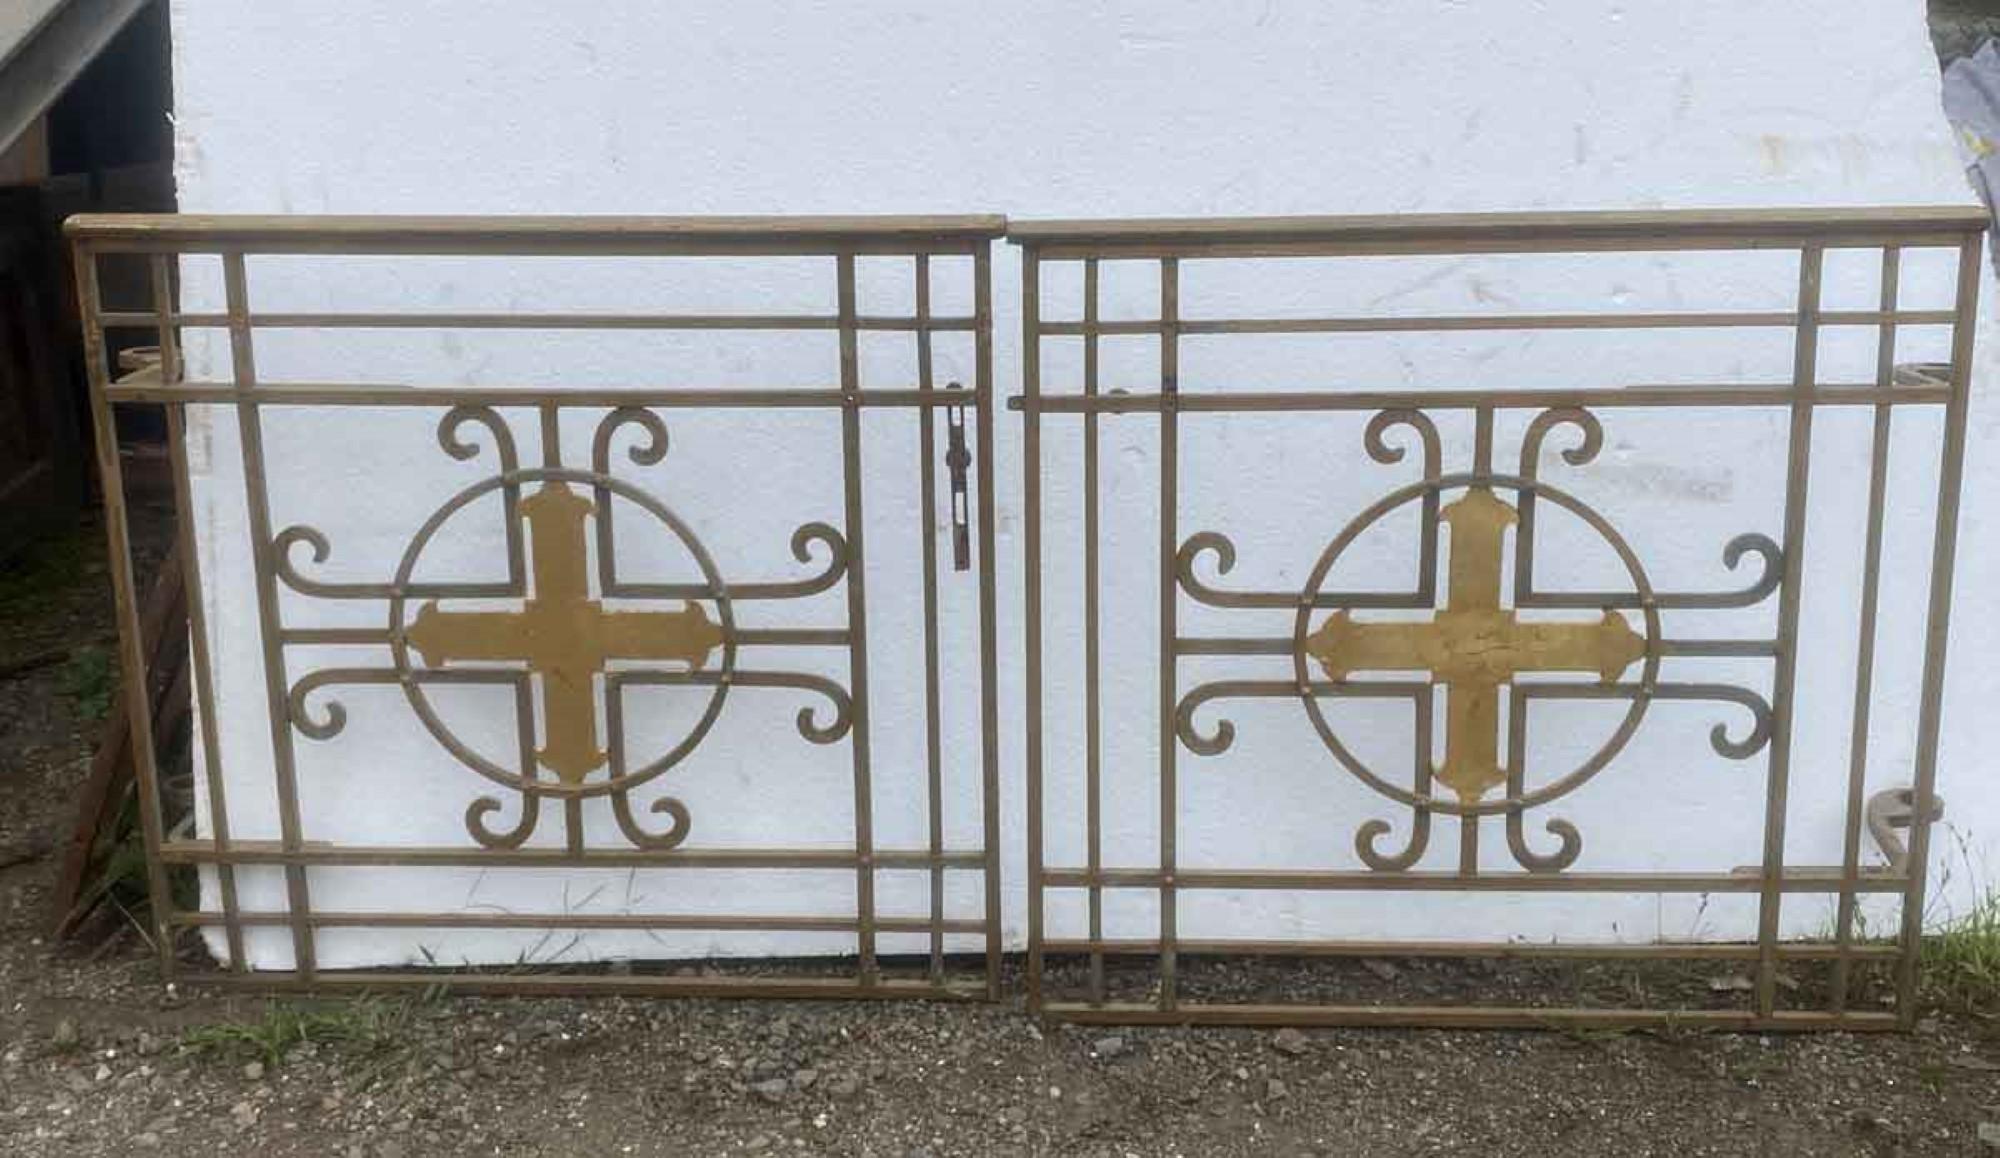 1950s pair of antique solid steel alter gates with a simple ornate cross design. Brass and gold finish. This can be seen at our 400 Gilligan St location in Scranton, PA.